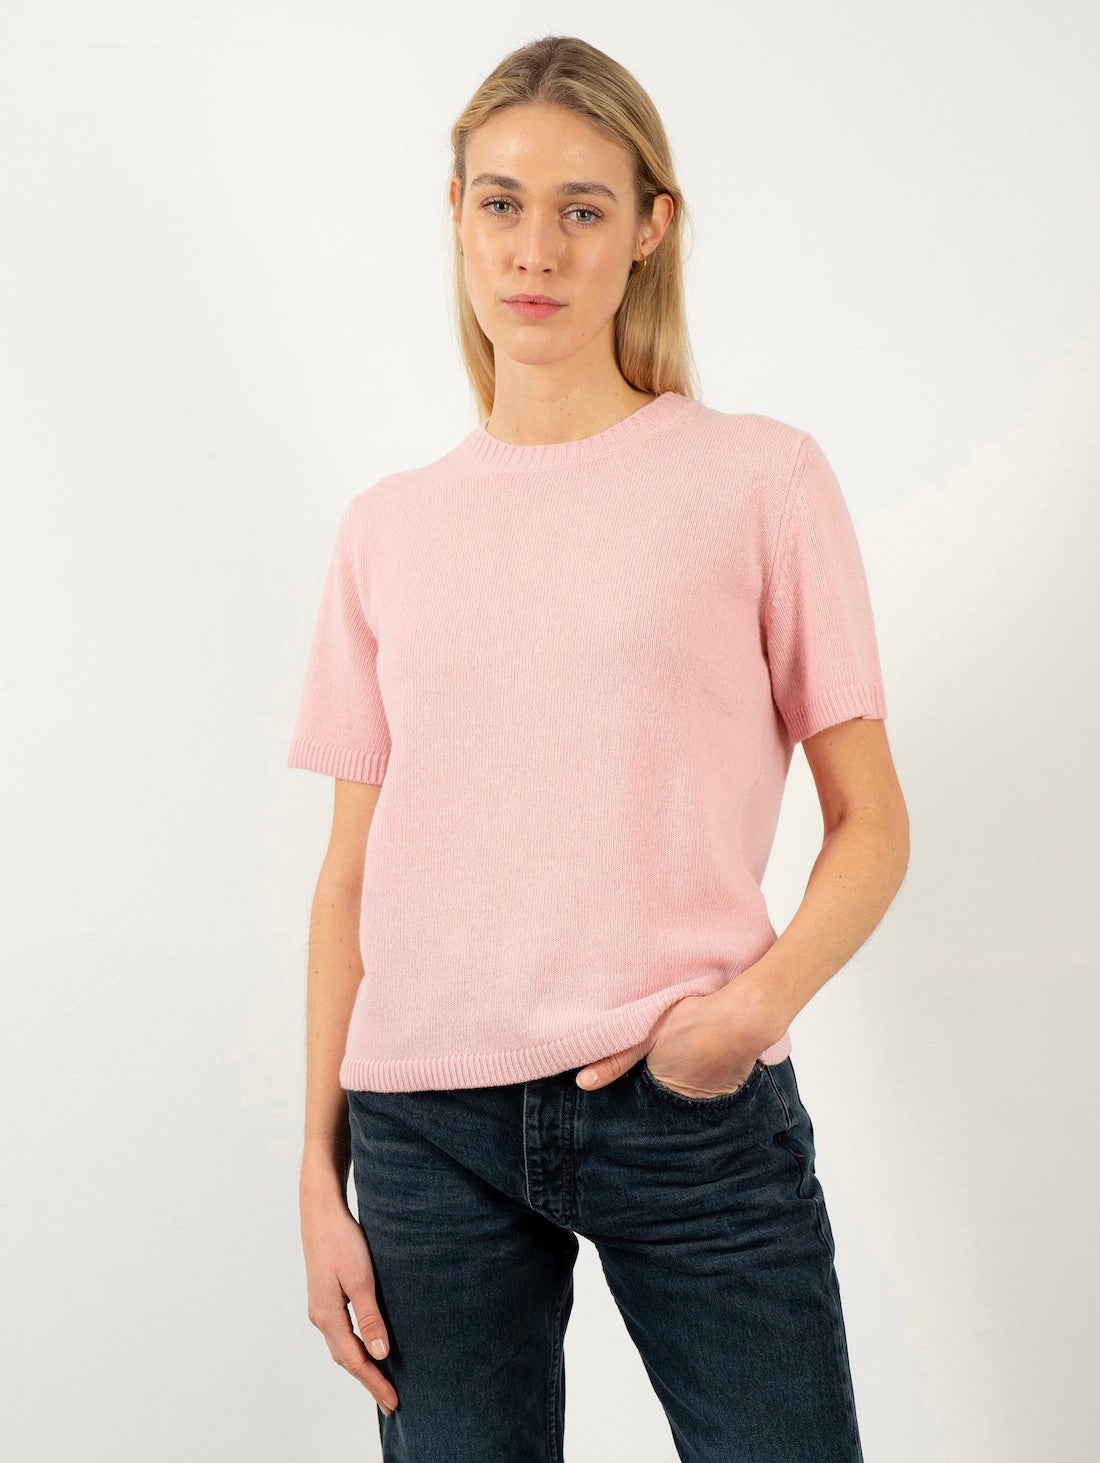 JULES SWEATER IN PINK BLOSSOM